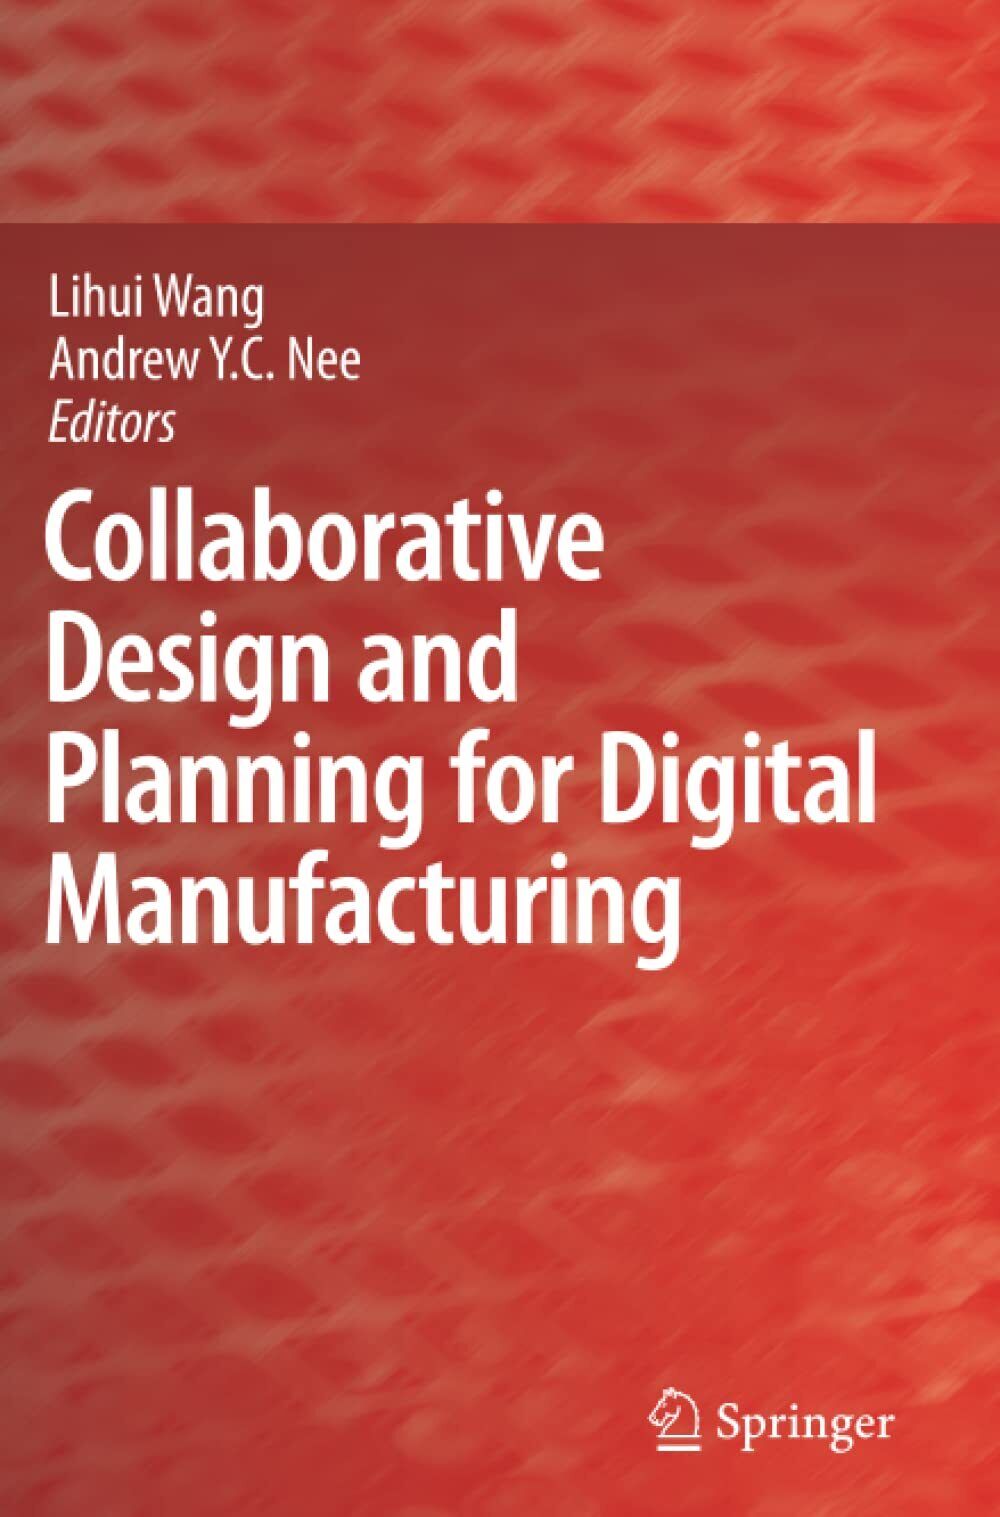 Collaborative Design and Planning for Digital Manufacturing - Lihui Wang, 2010 